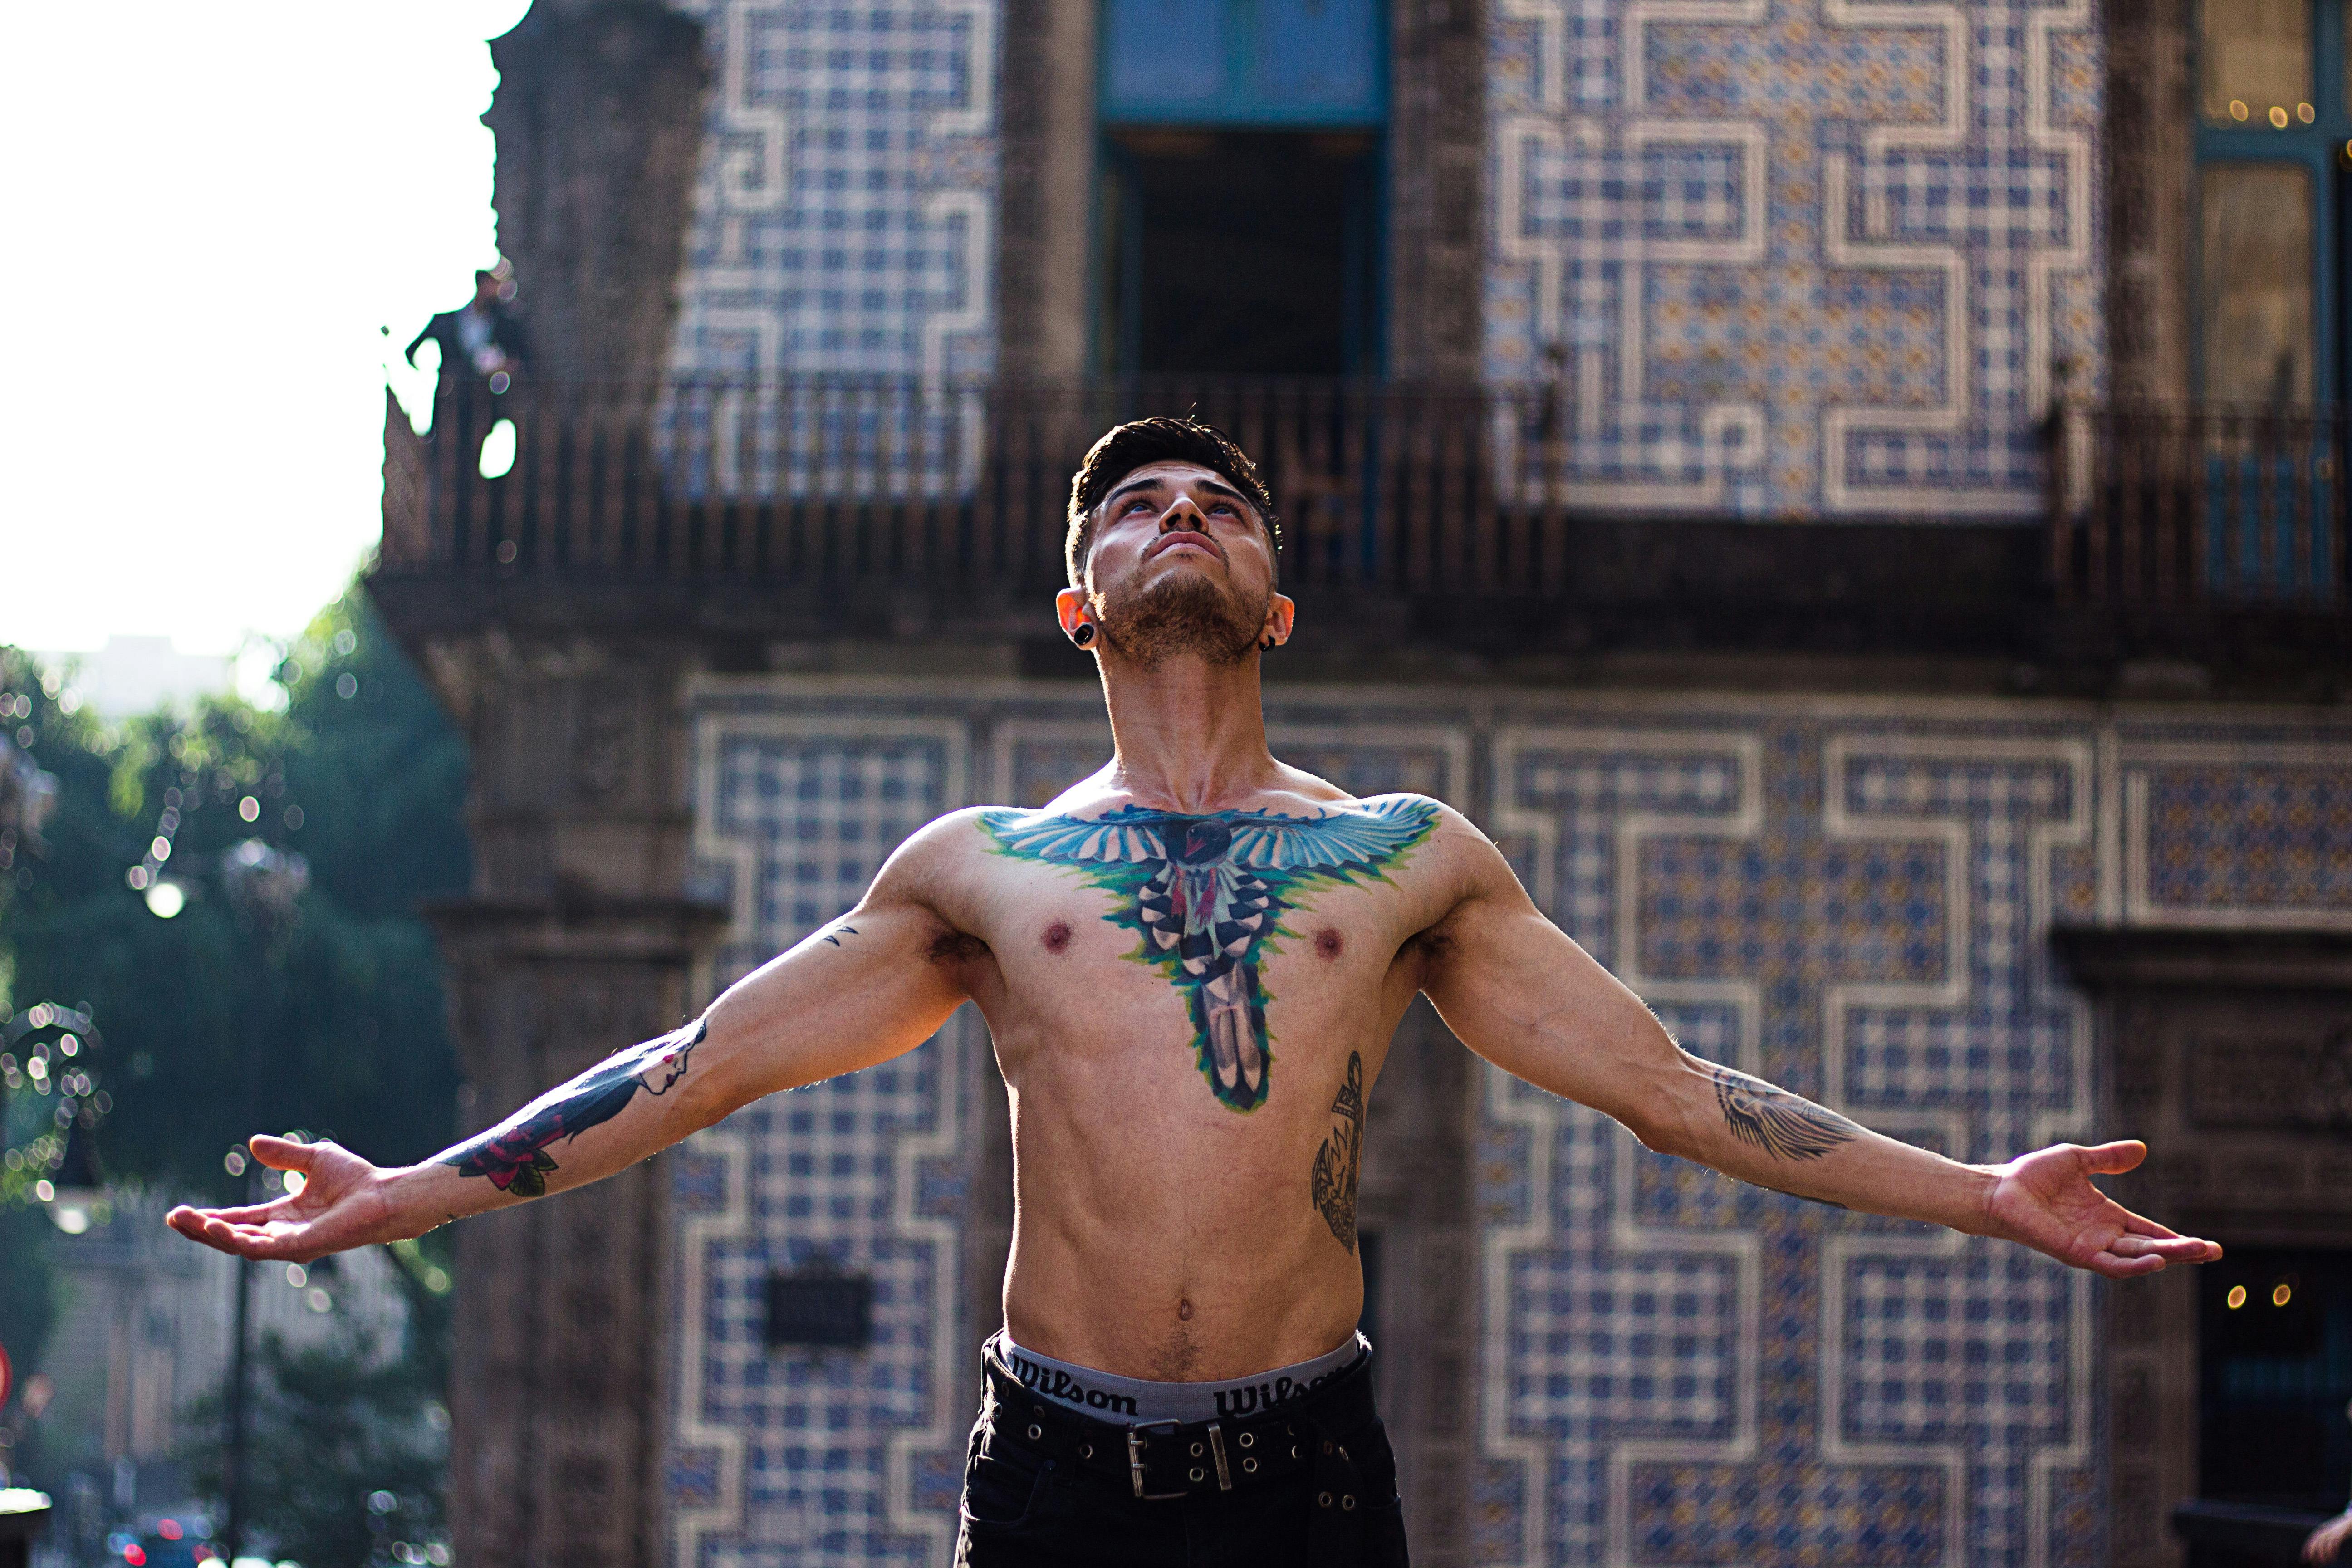 Tattooed Man Pictures | Download Free Images on Unsplash